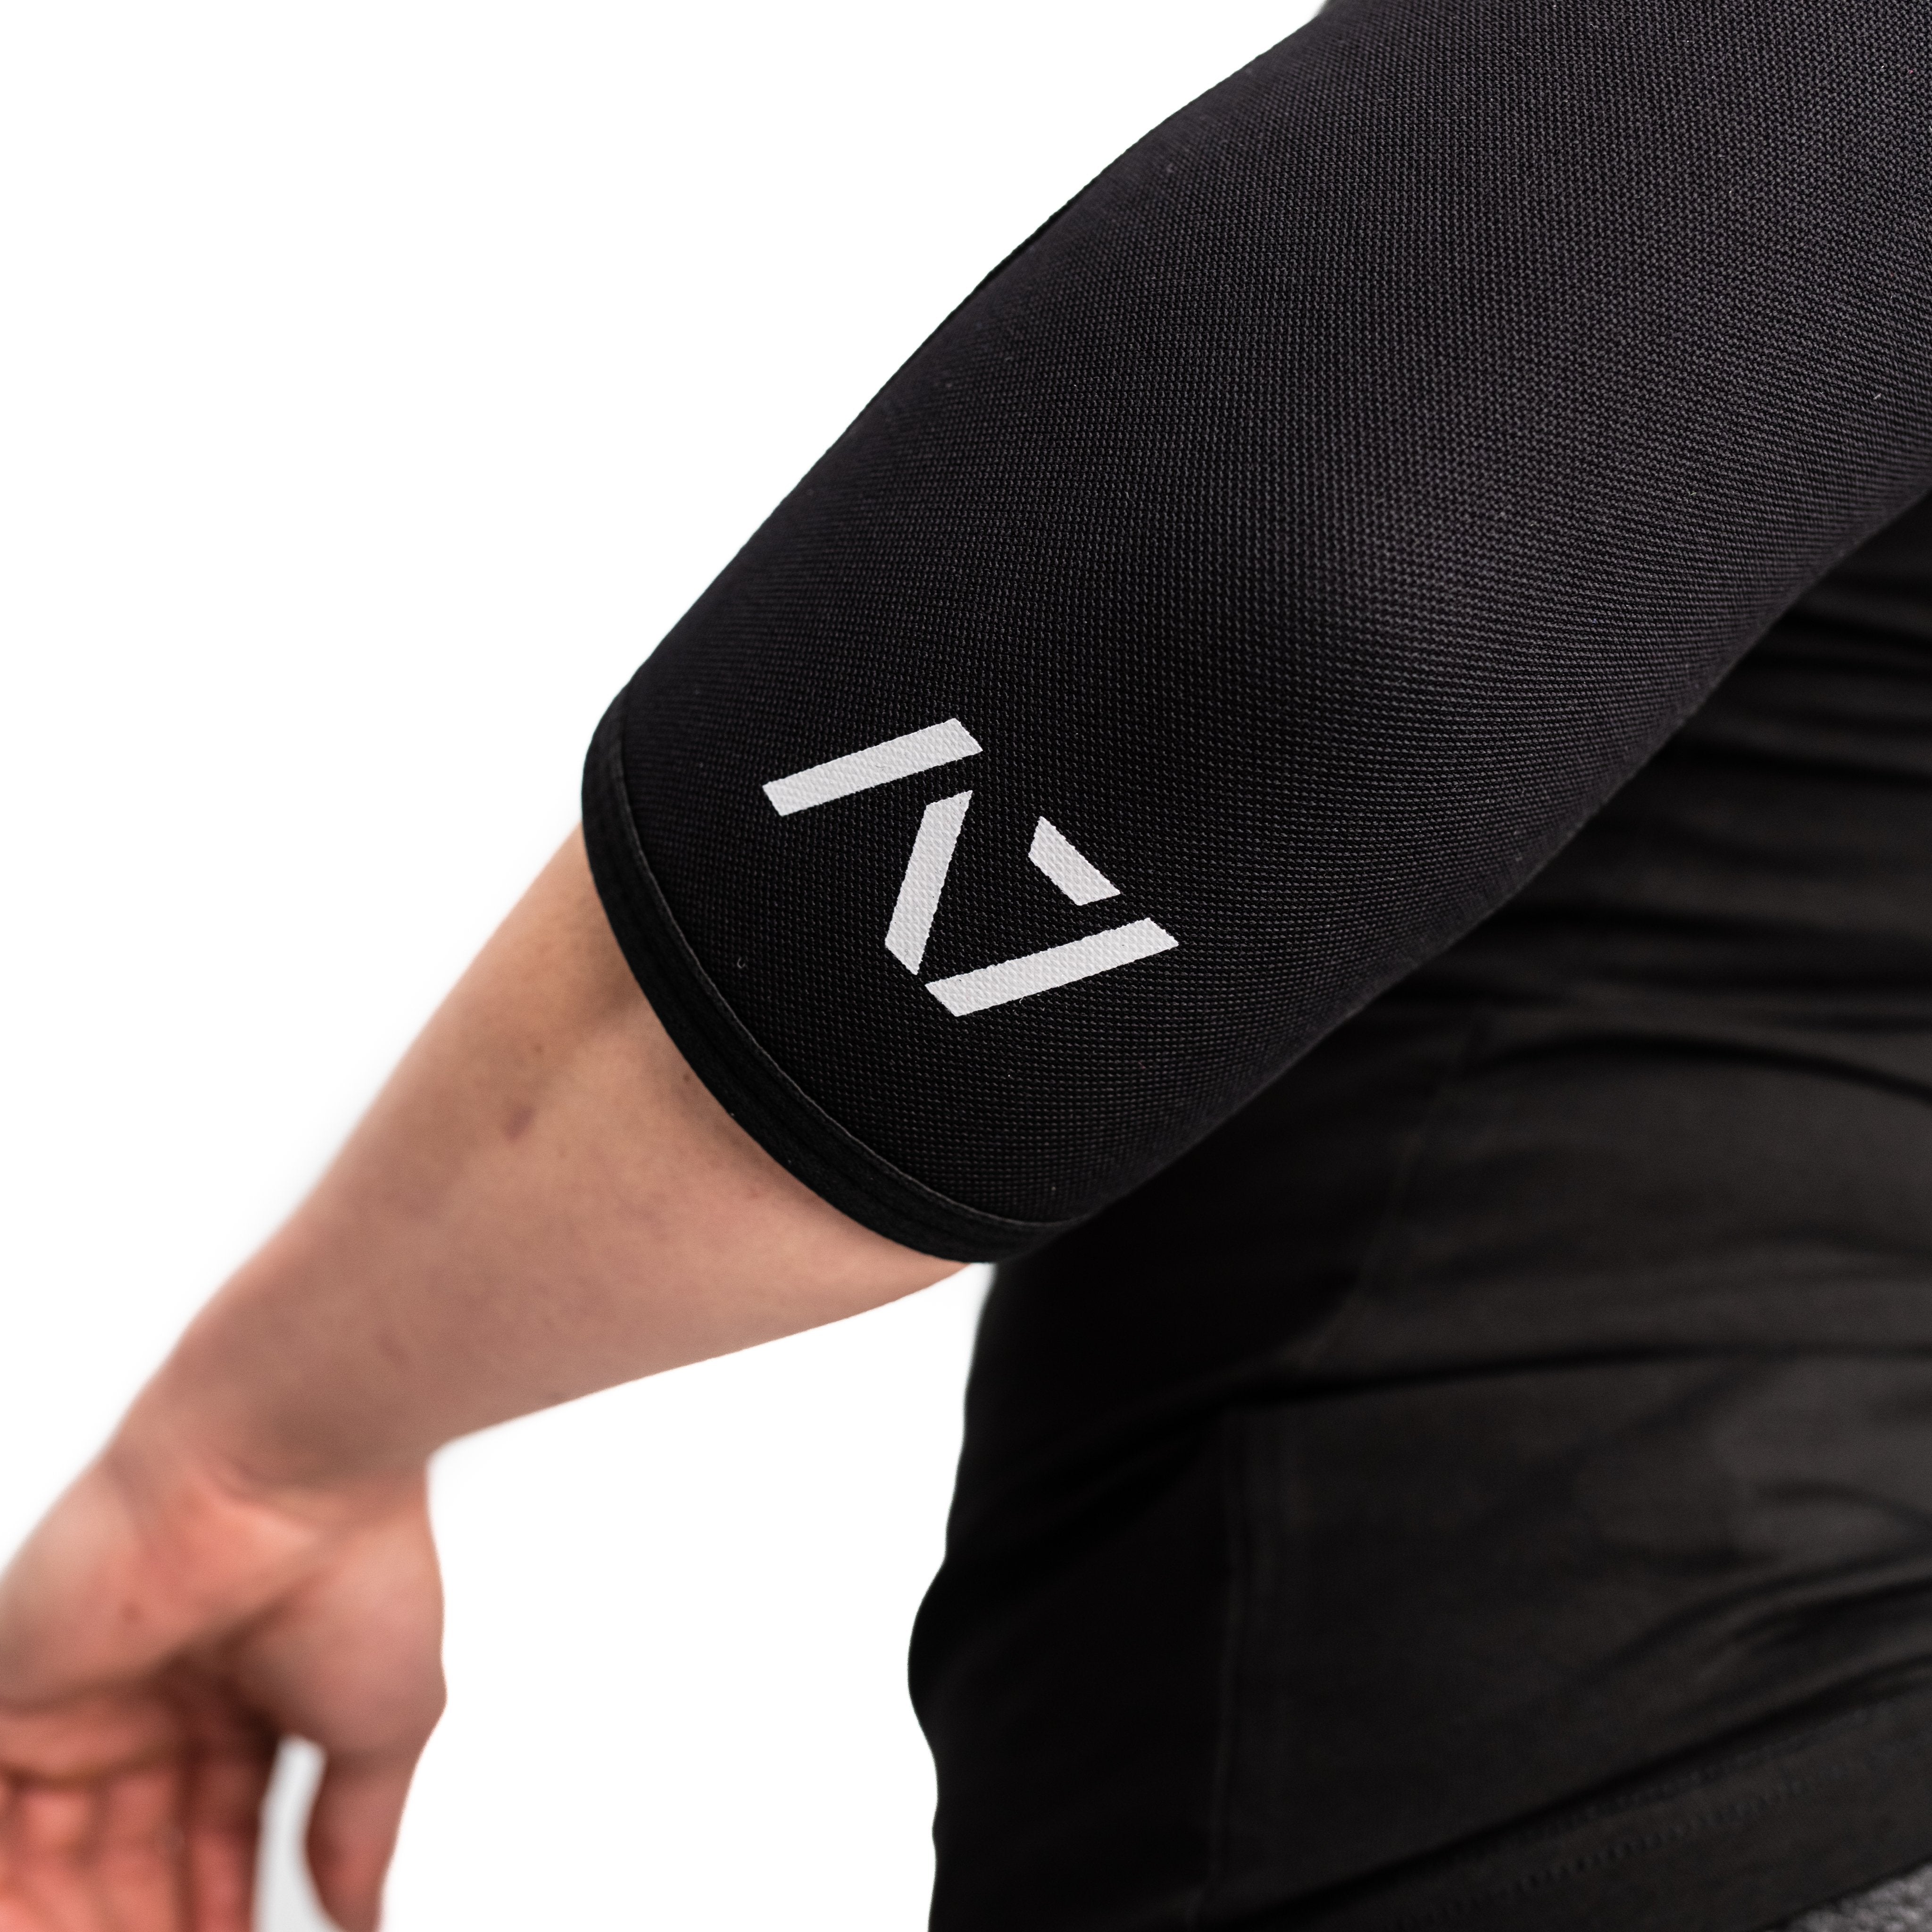 A7 7mm Elbow Sleeves - Black